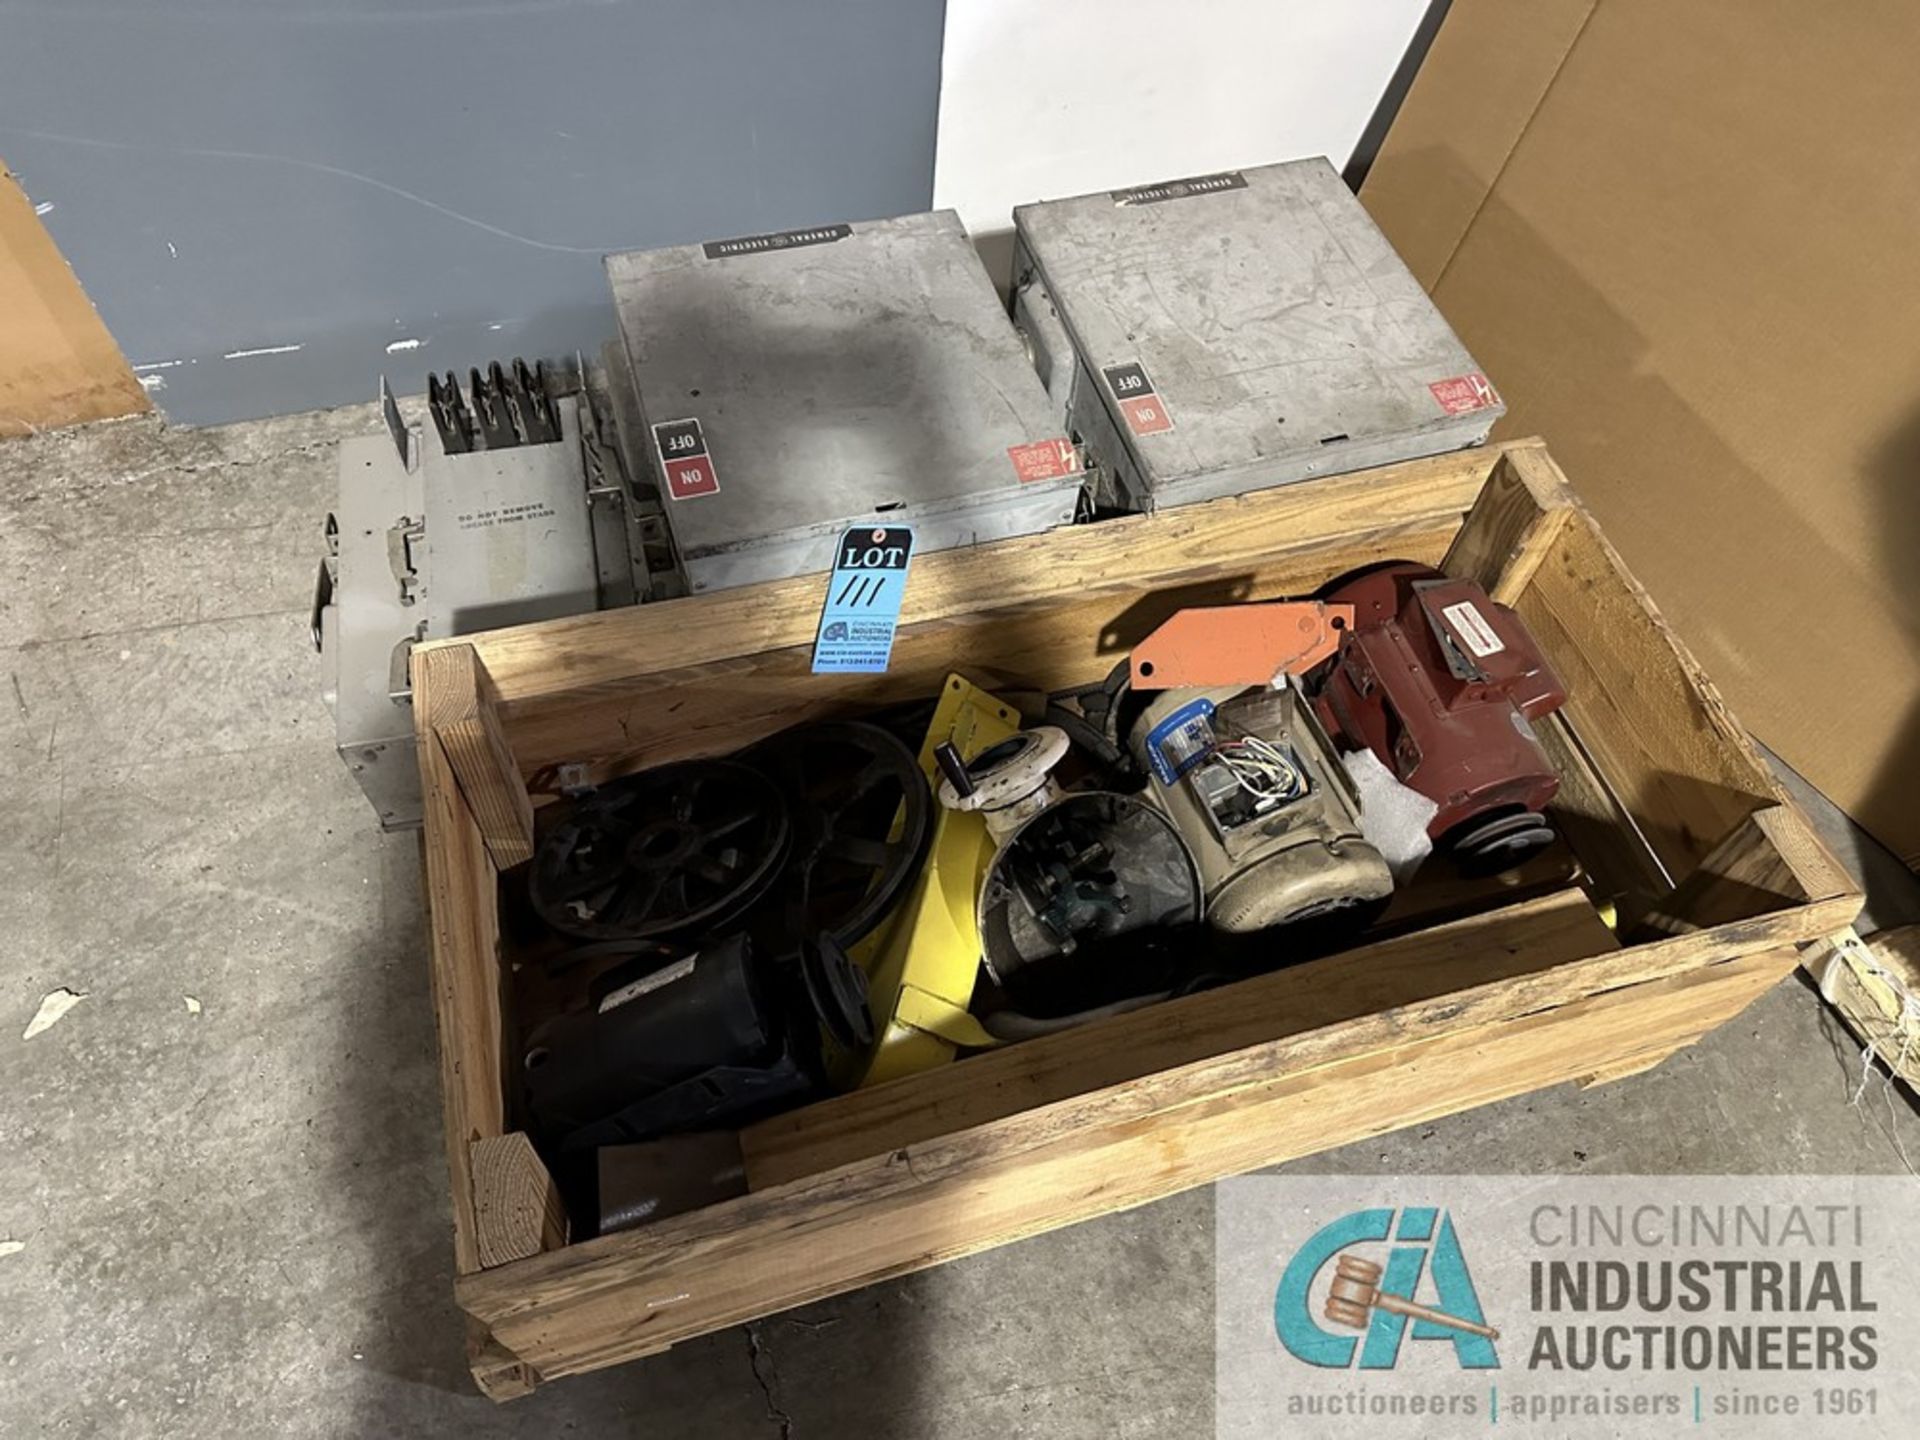 (LOT) (5) 200 AMP GE CAT. NO. FVR464R BUSS PLUGS ON SKID WITH MISCELLANEOUS PARTS - Located in